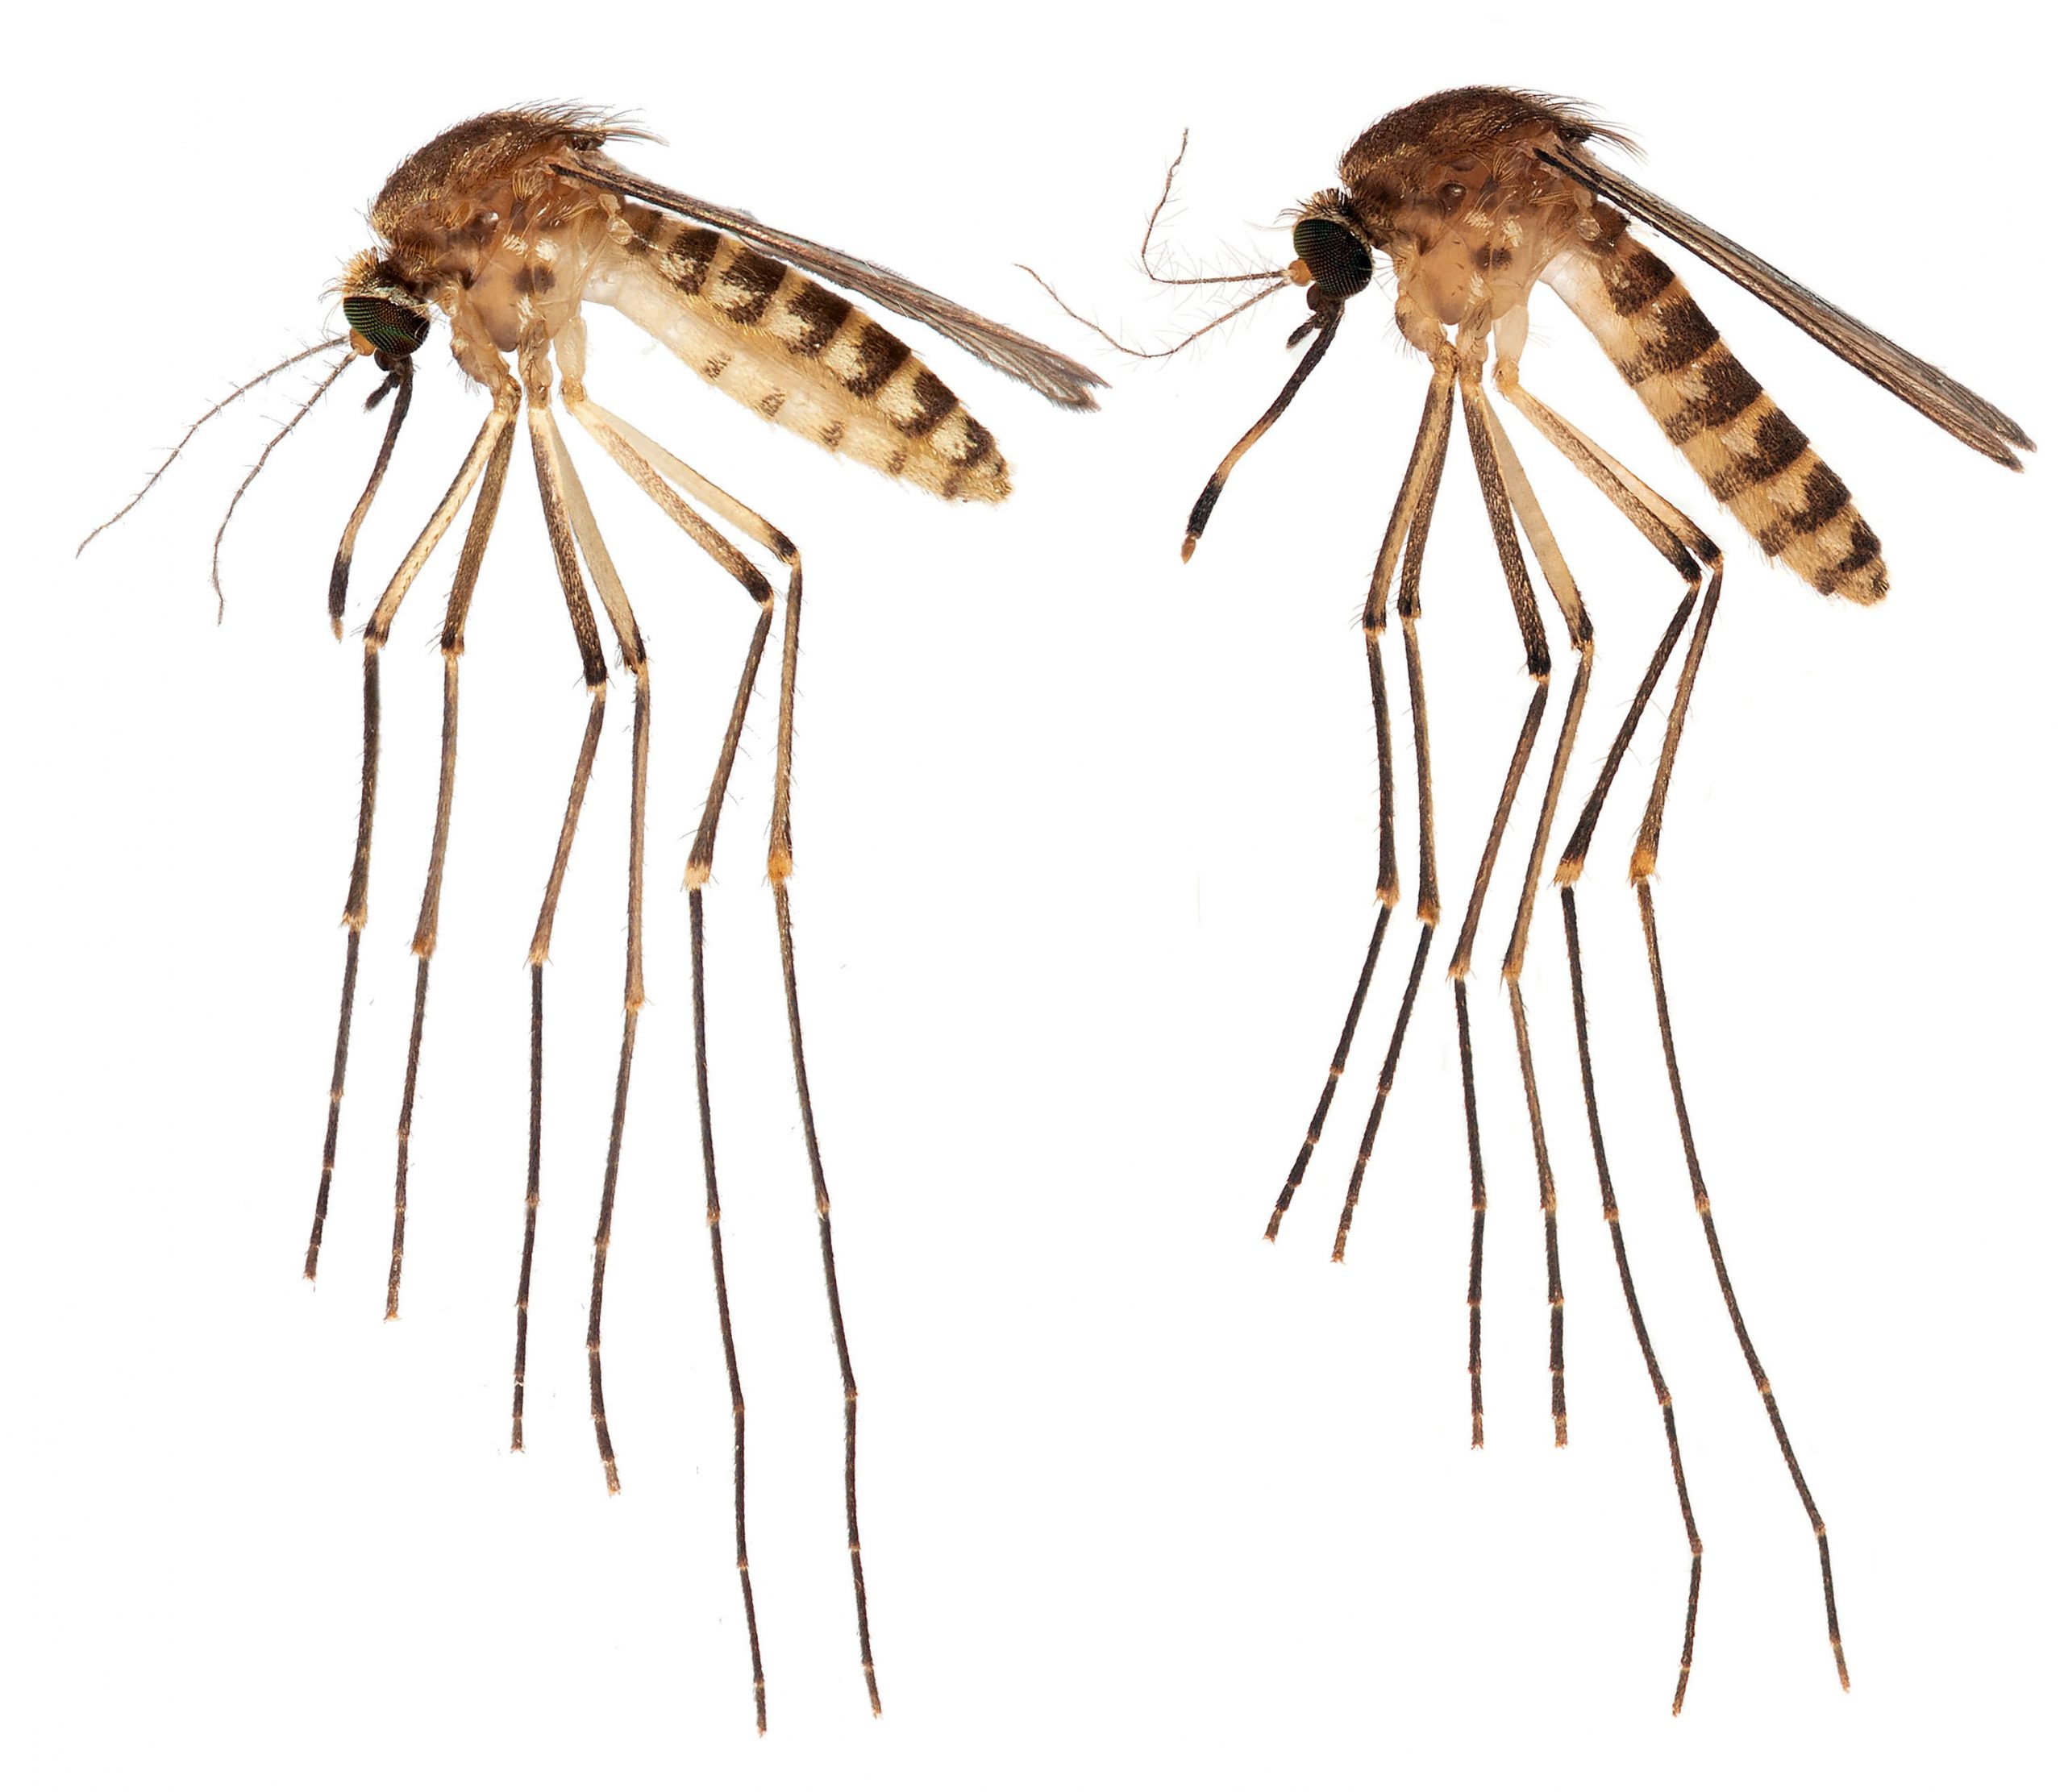 NEW DEADLY MOSQUITO FOUND